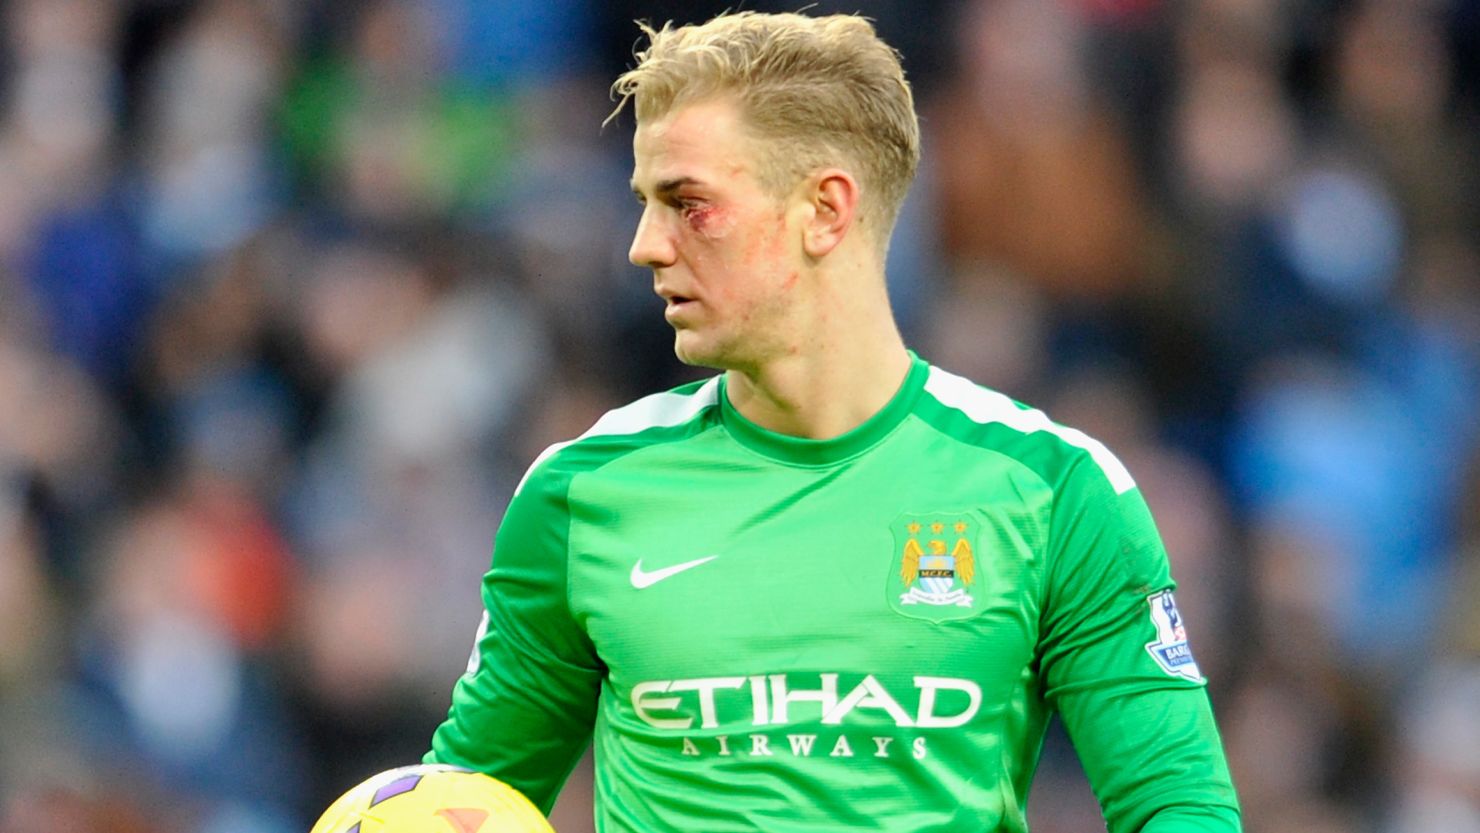 Man City keeper Joe Hart suffered a cut under his eye but stayed in the game and impressed against Crystal Palace. 